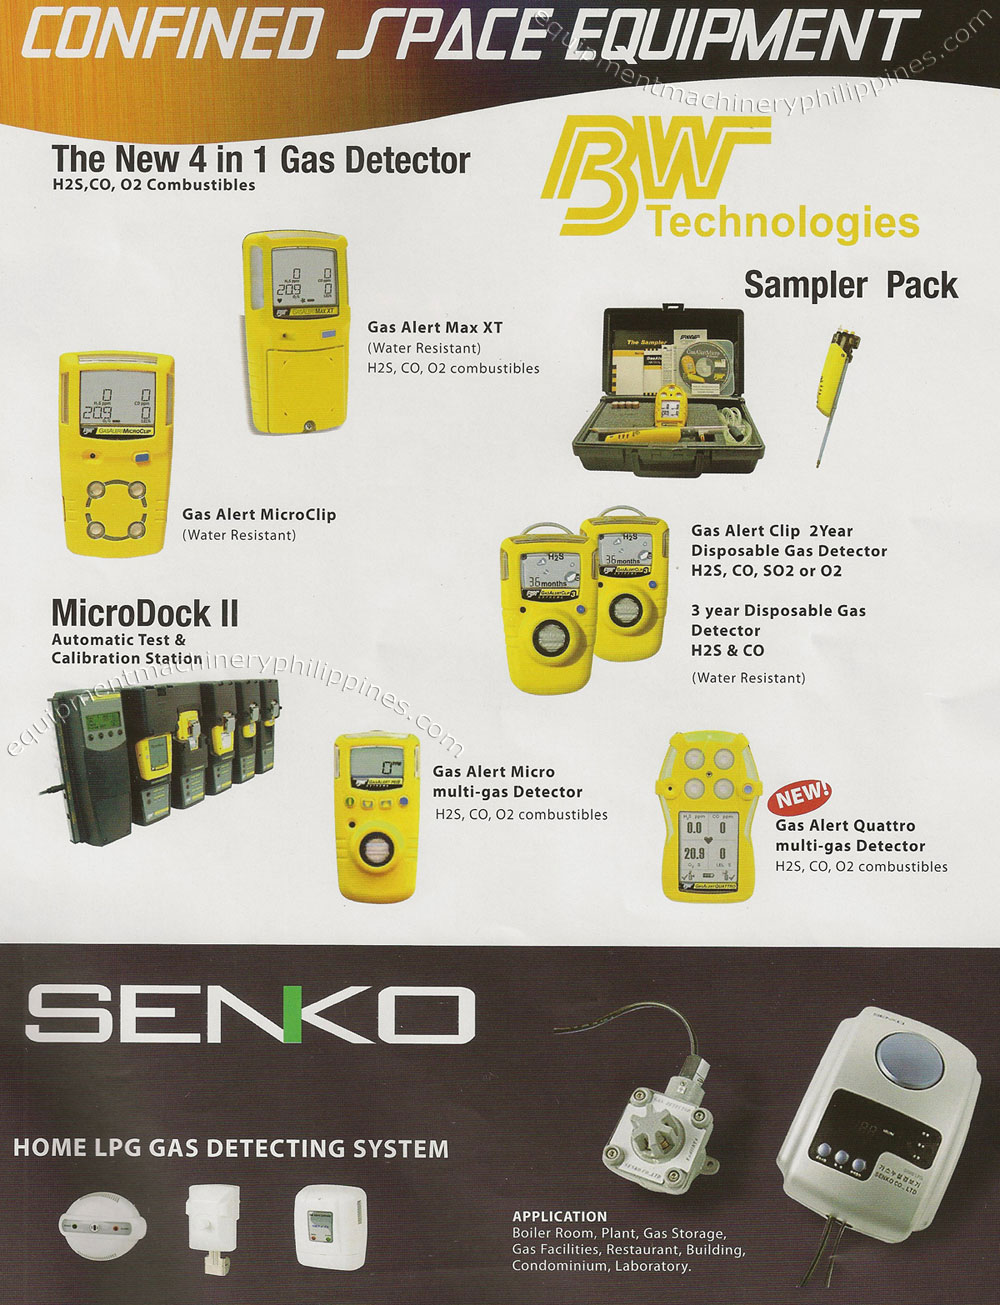 Confined Space Equipment, Gas Detector, Sampler Pack